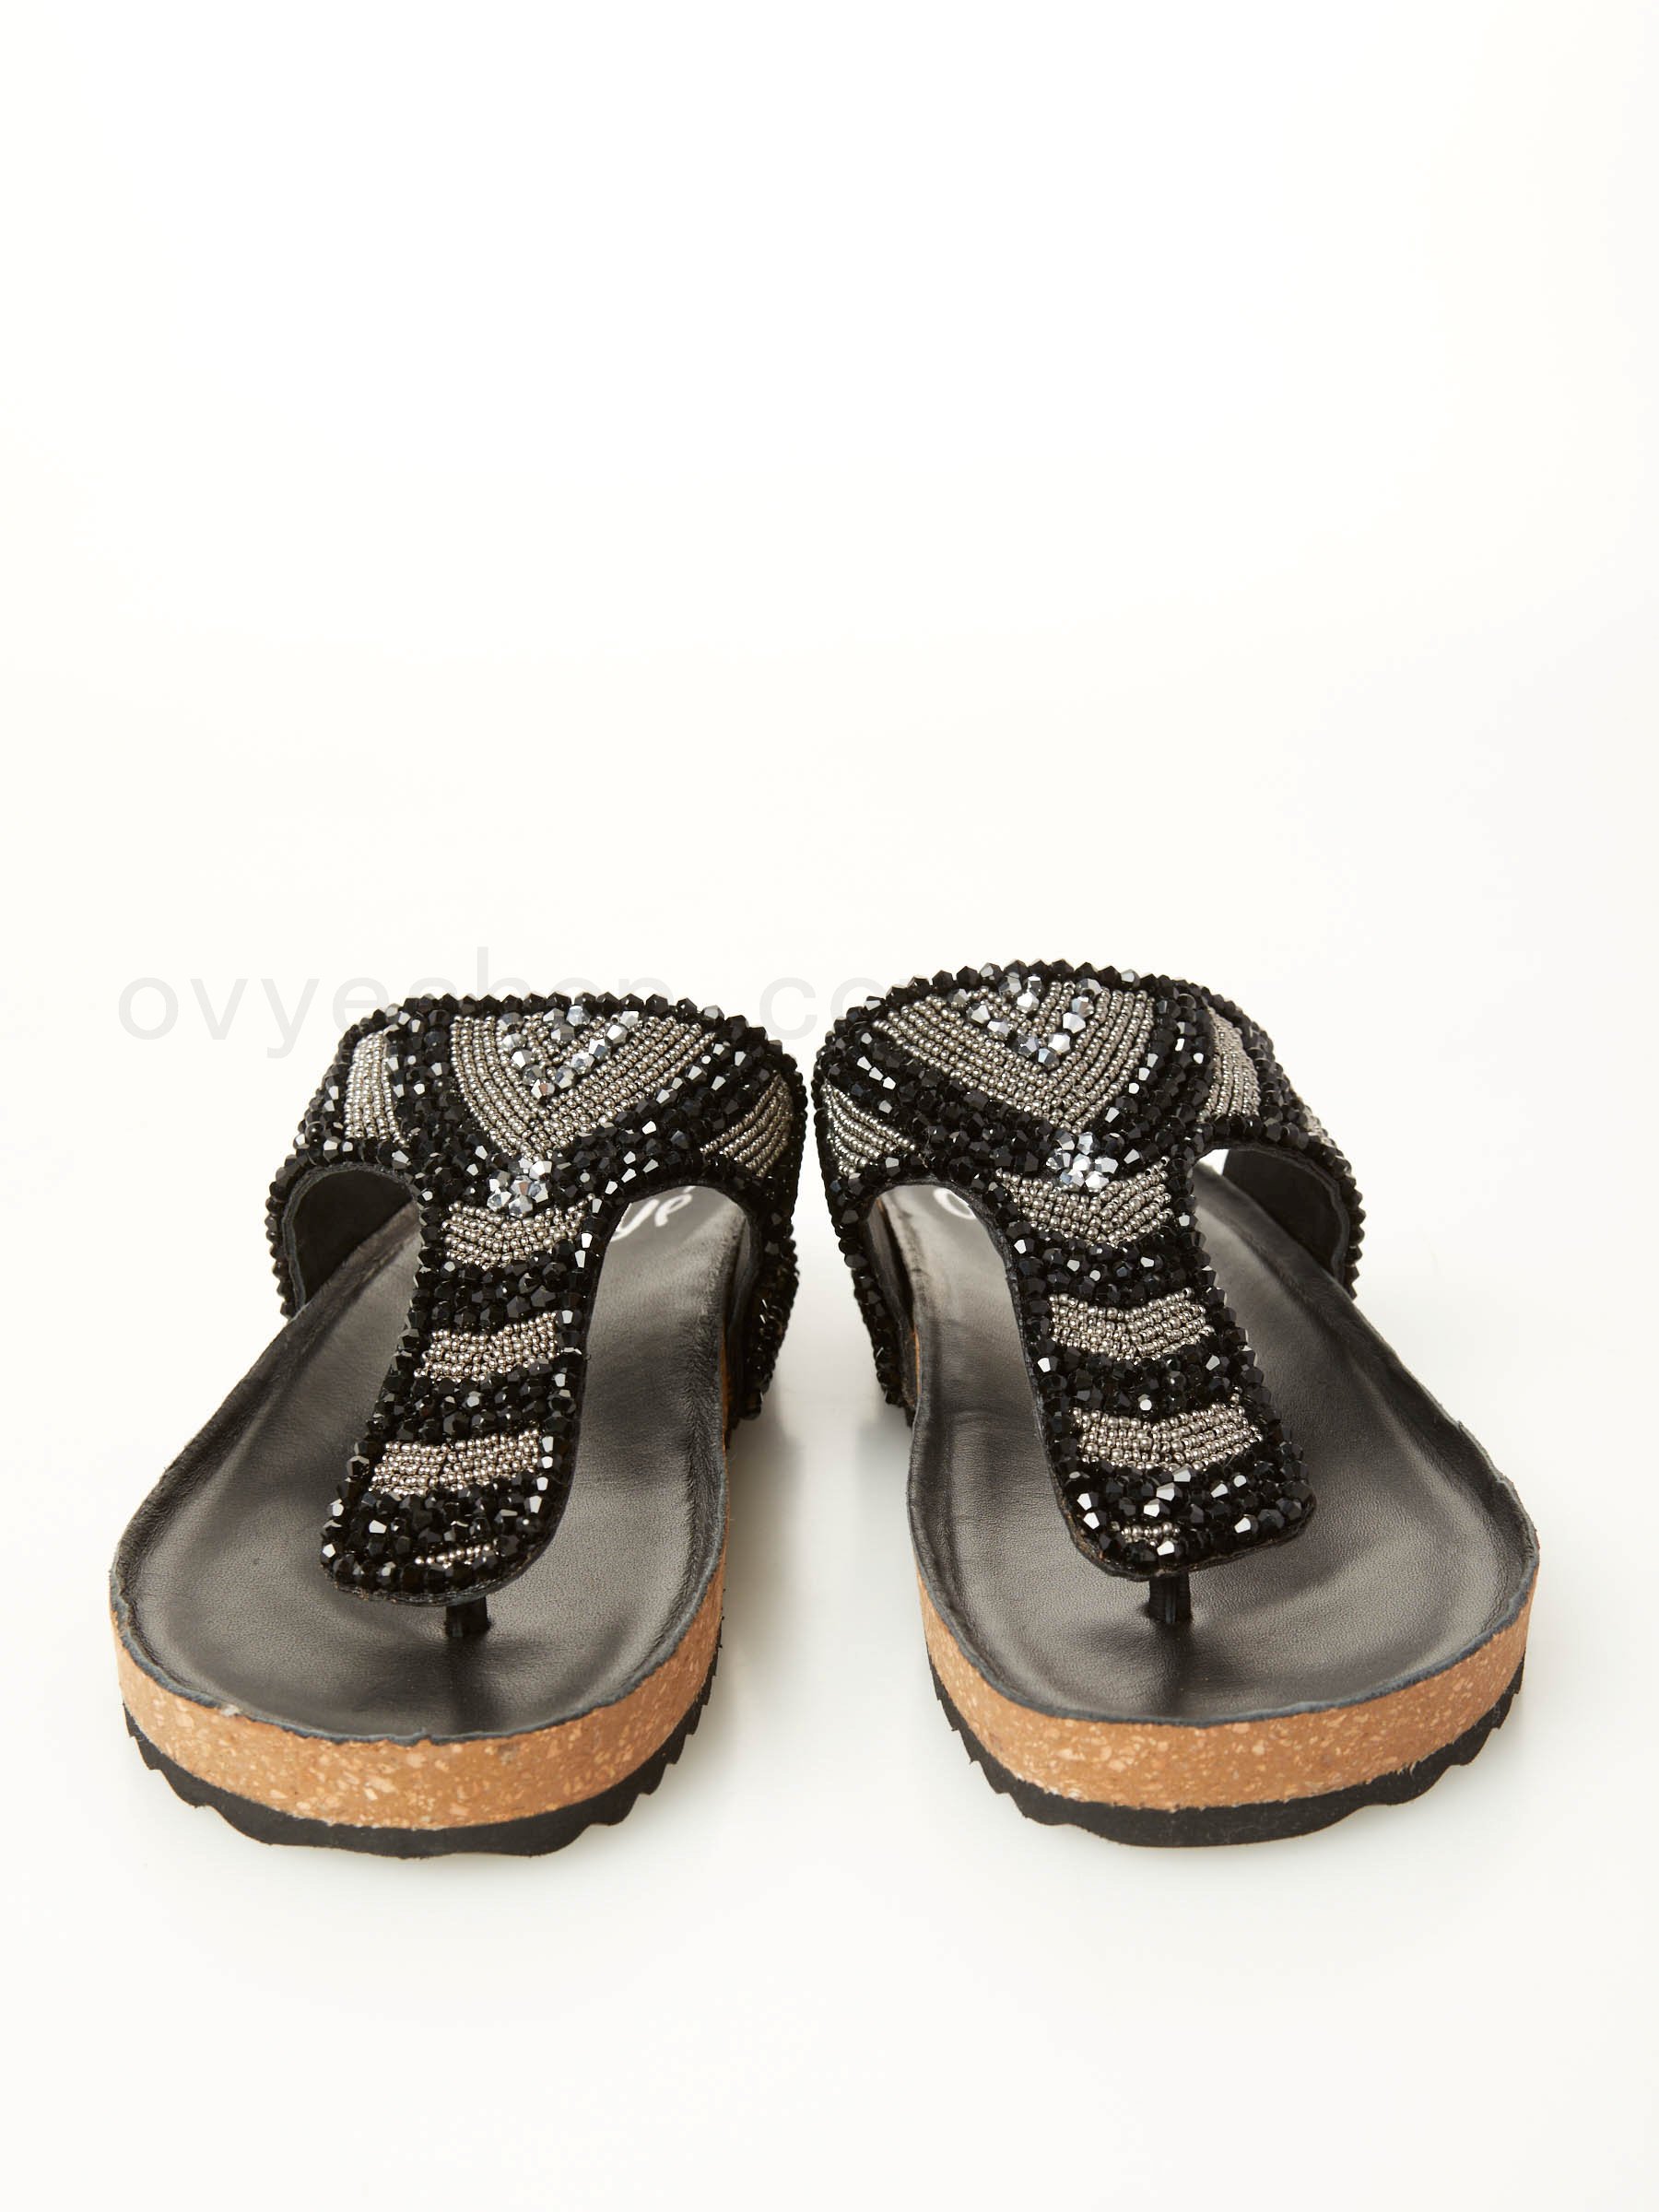 85% Codice Sconto Flip Flop With Beads F0817885-0535 ovy&#232; outlet